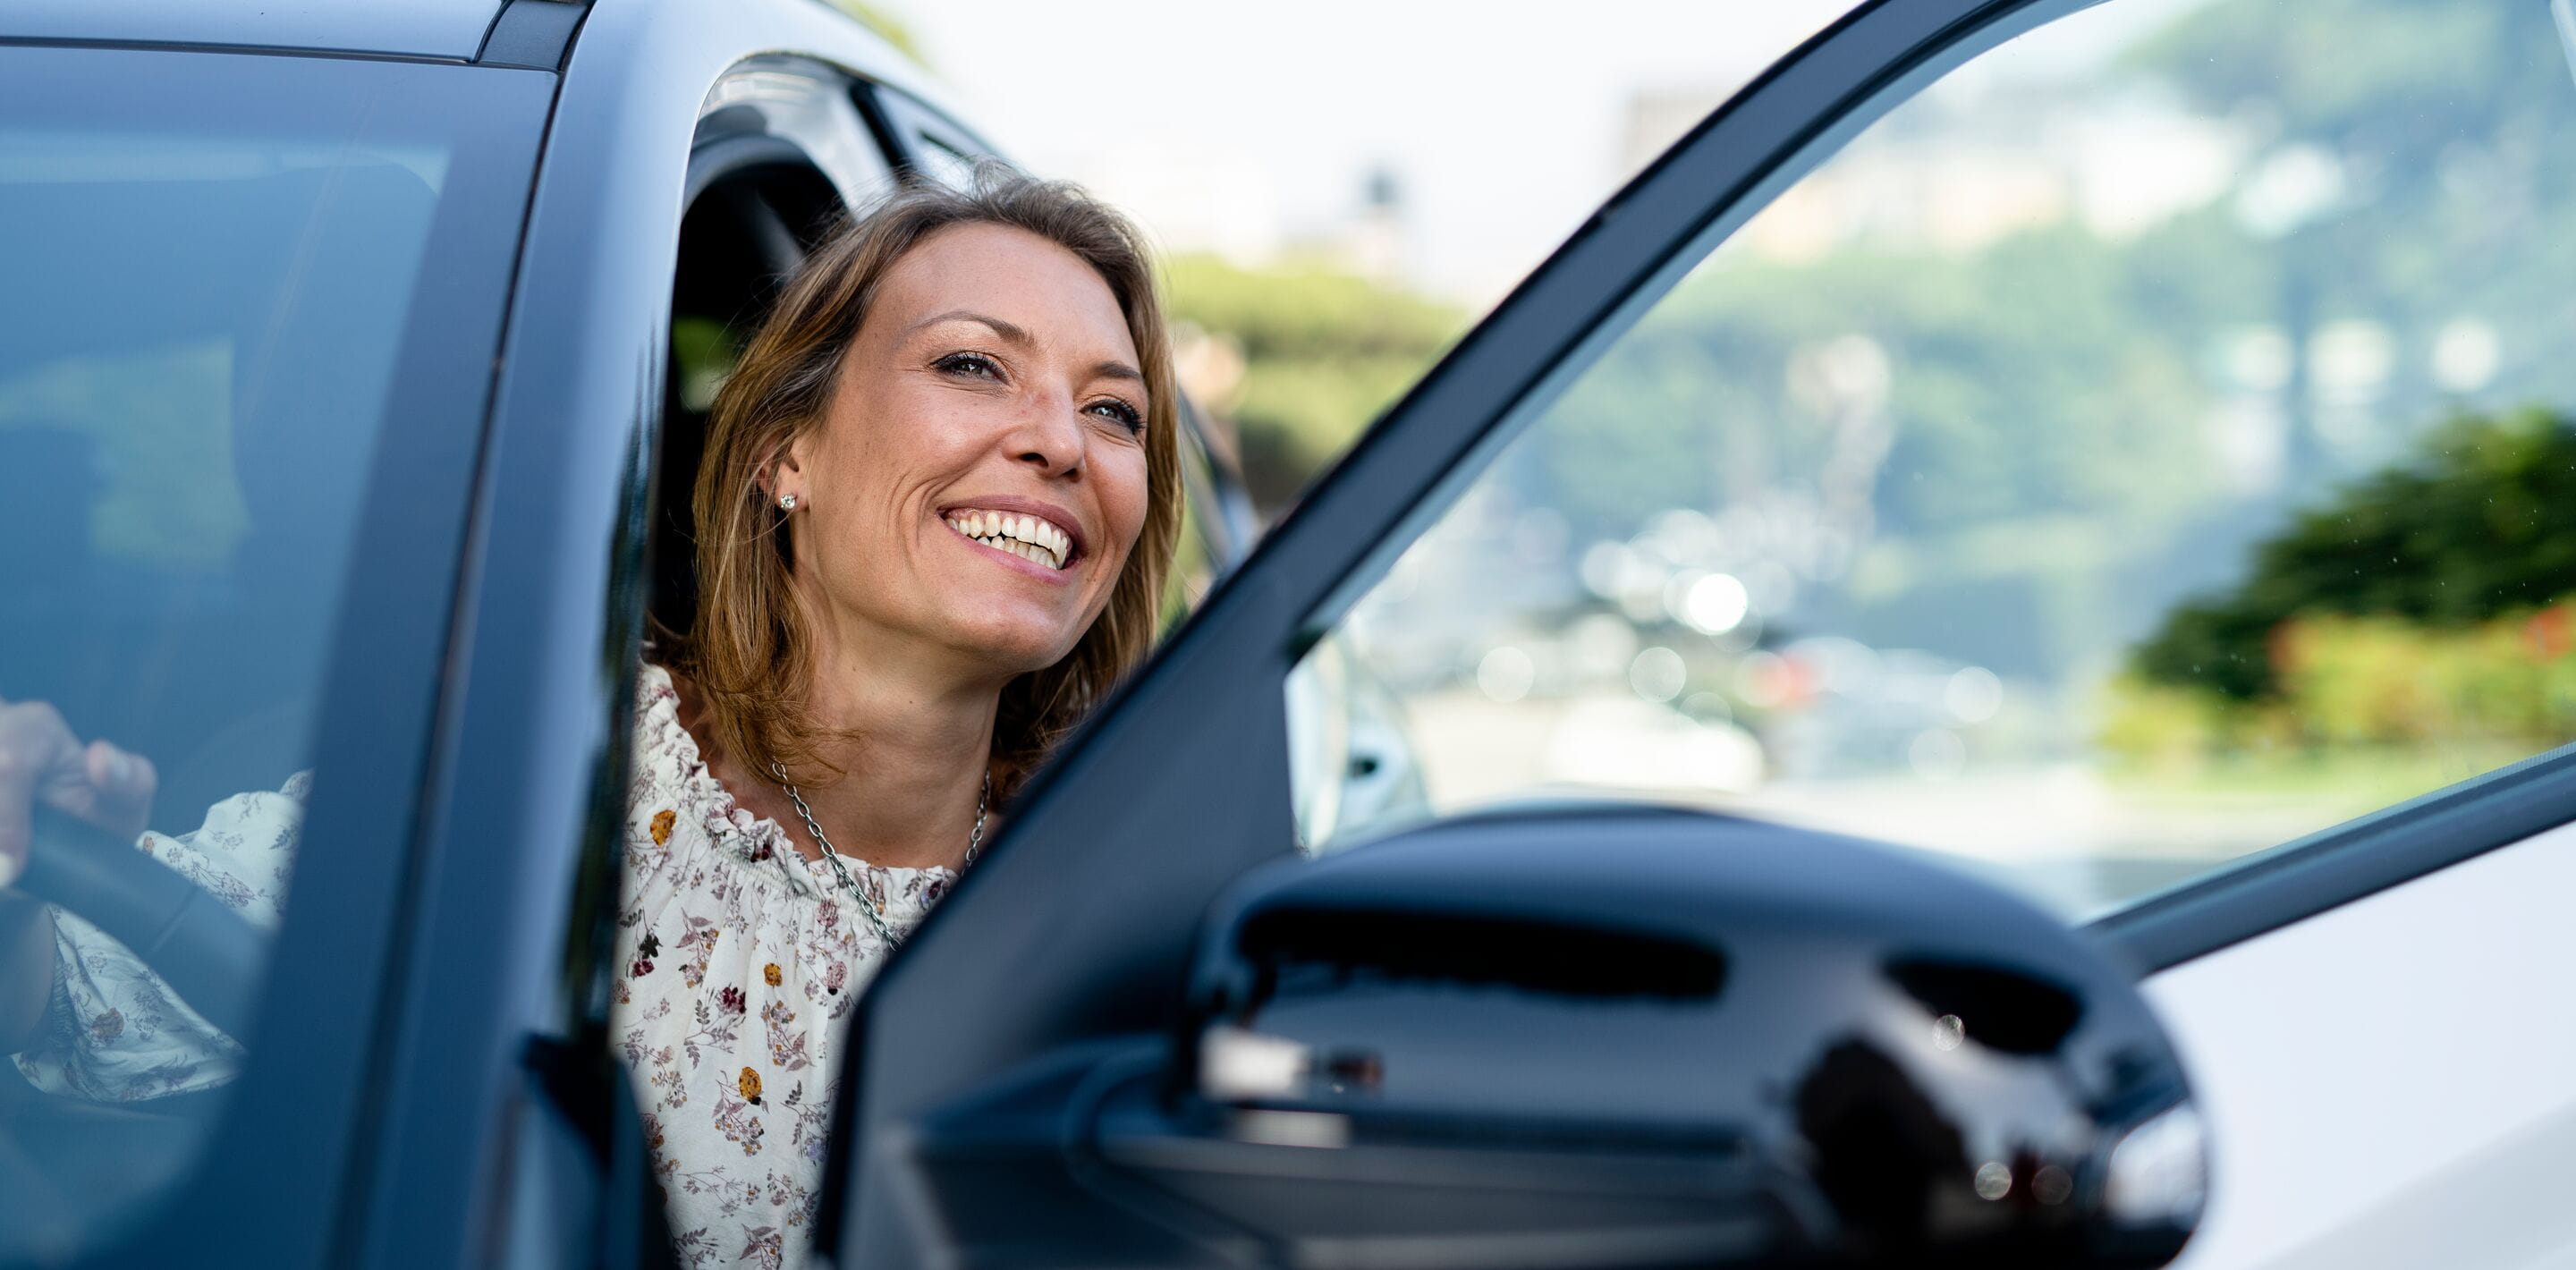 Woman smiling on driver's seat with the door open